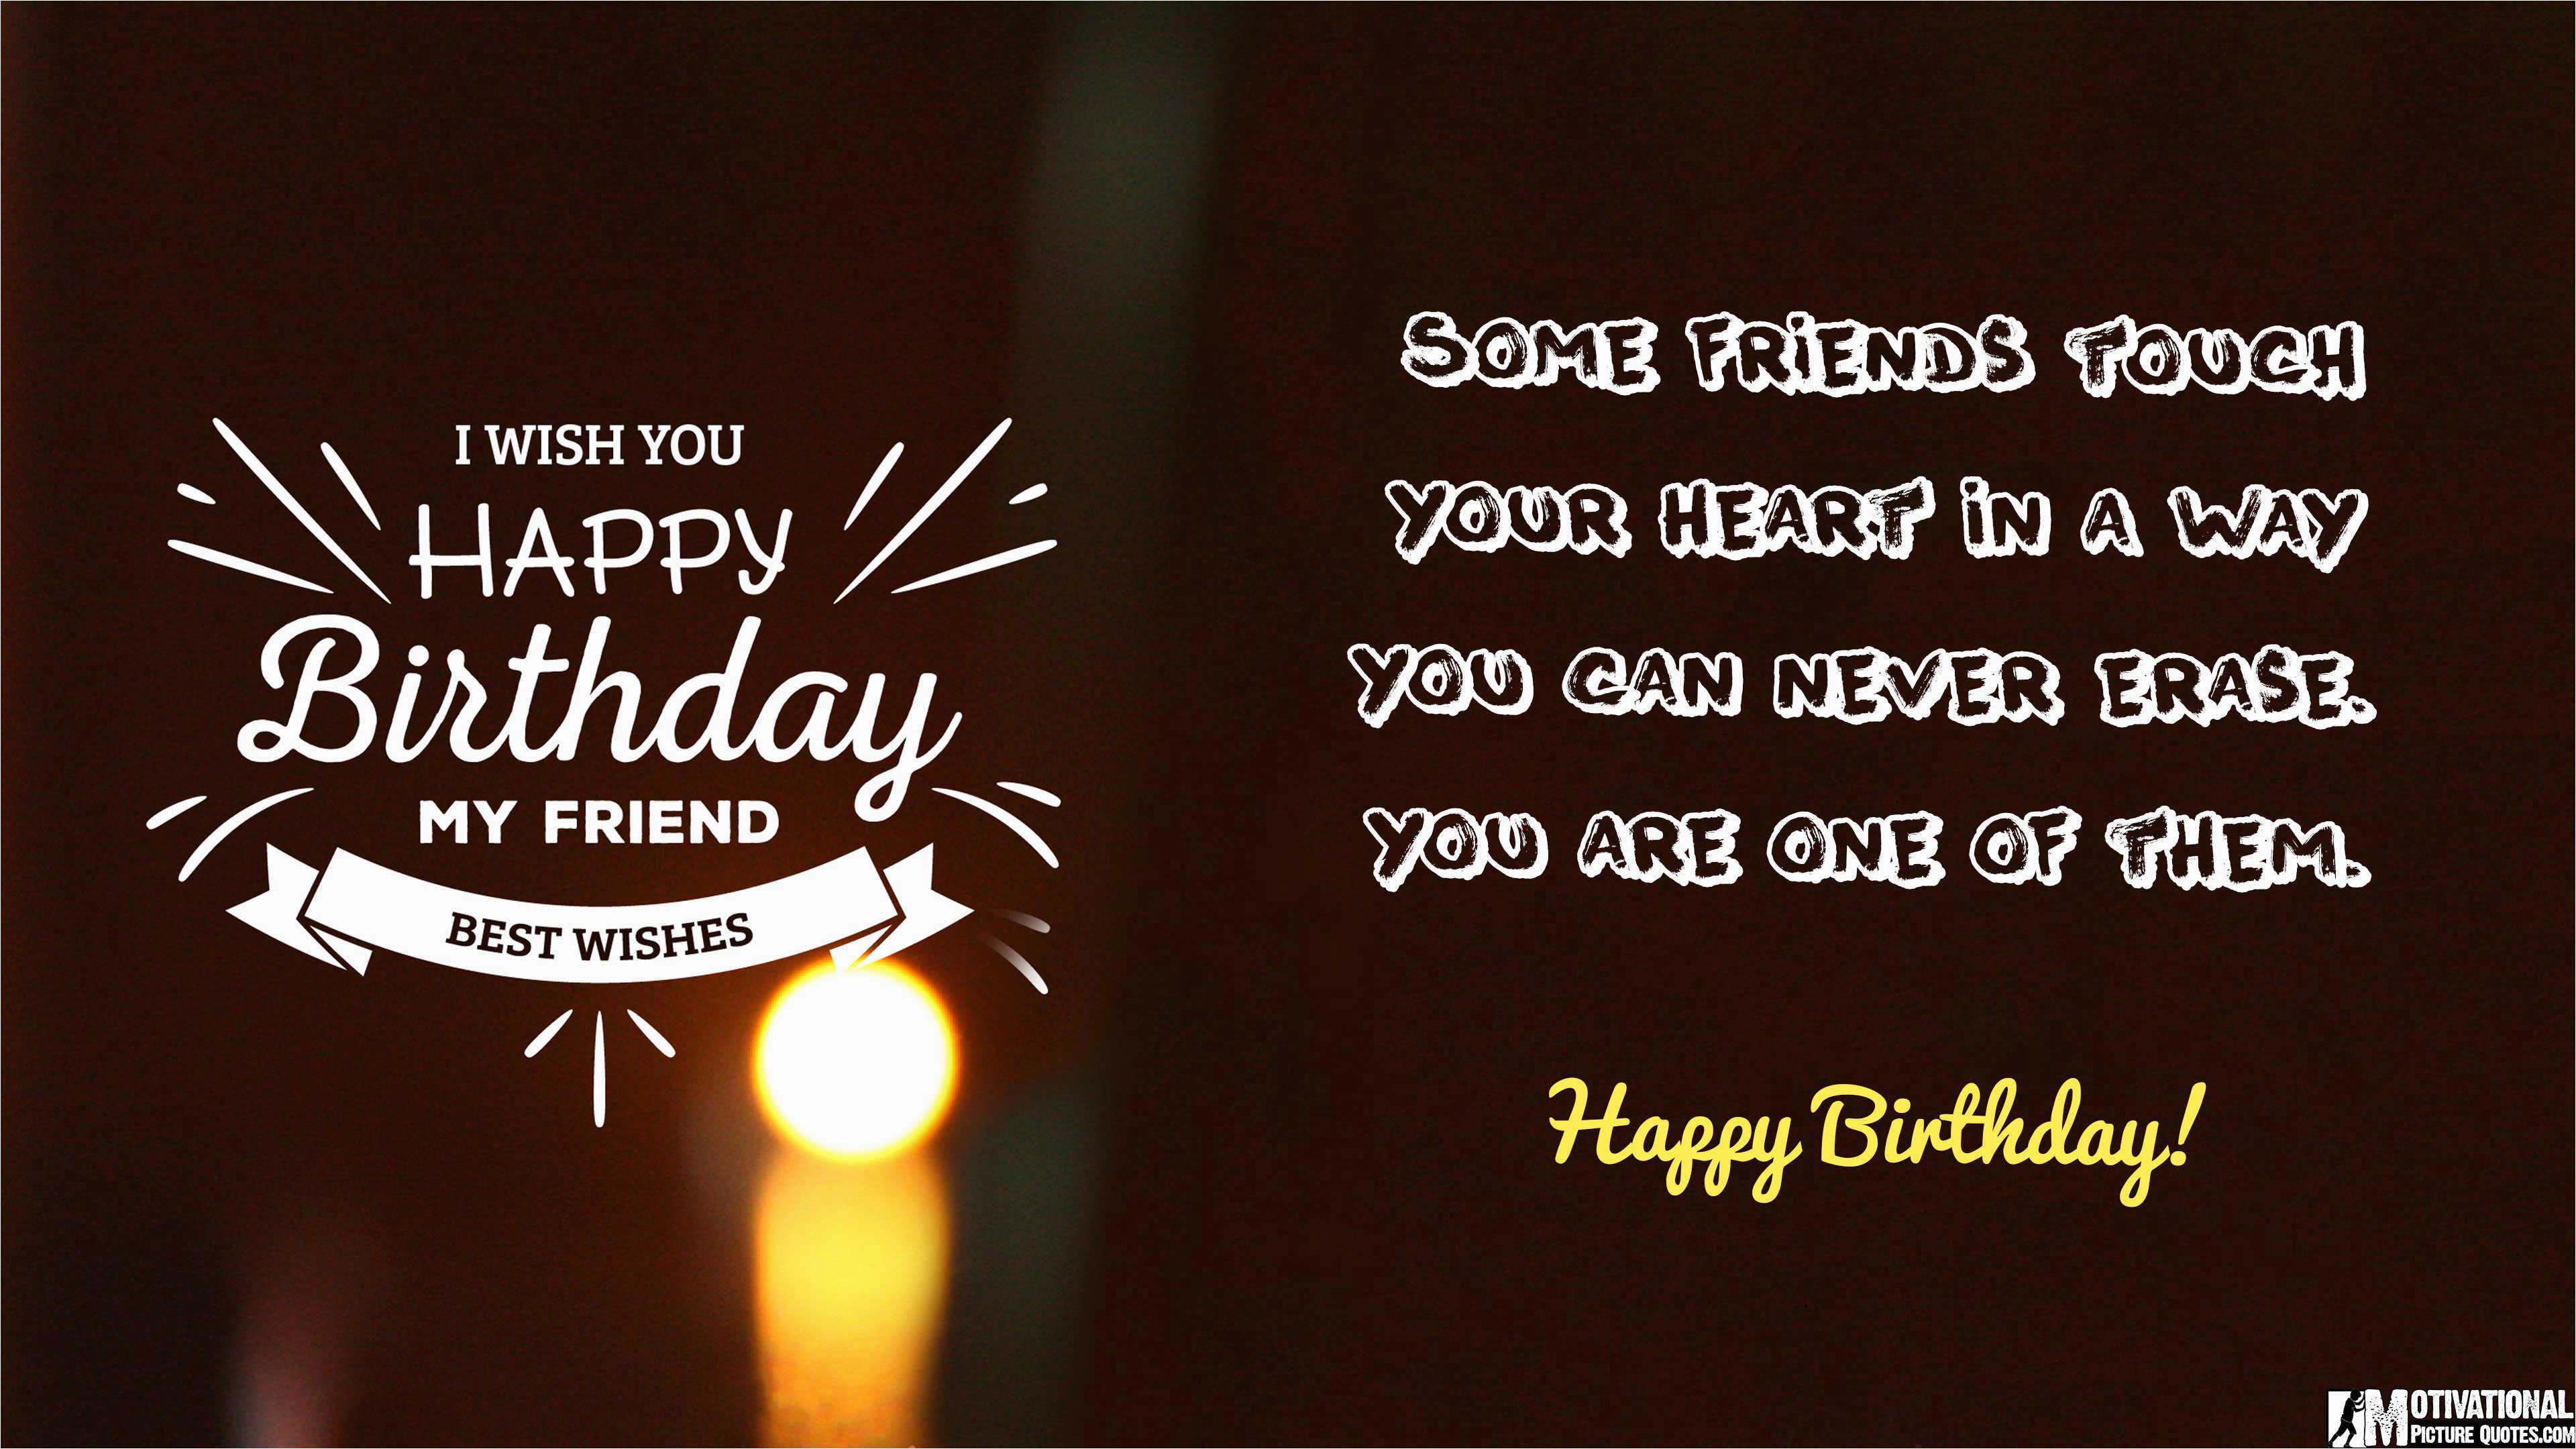 Happy Birthday Inspirational Quotes Friends 35 Inspirational Birthday Quotes Images Insbright